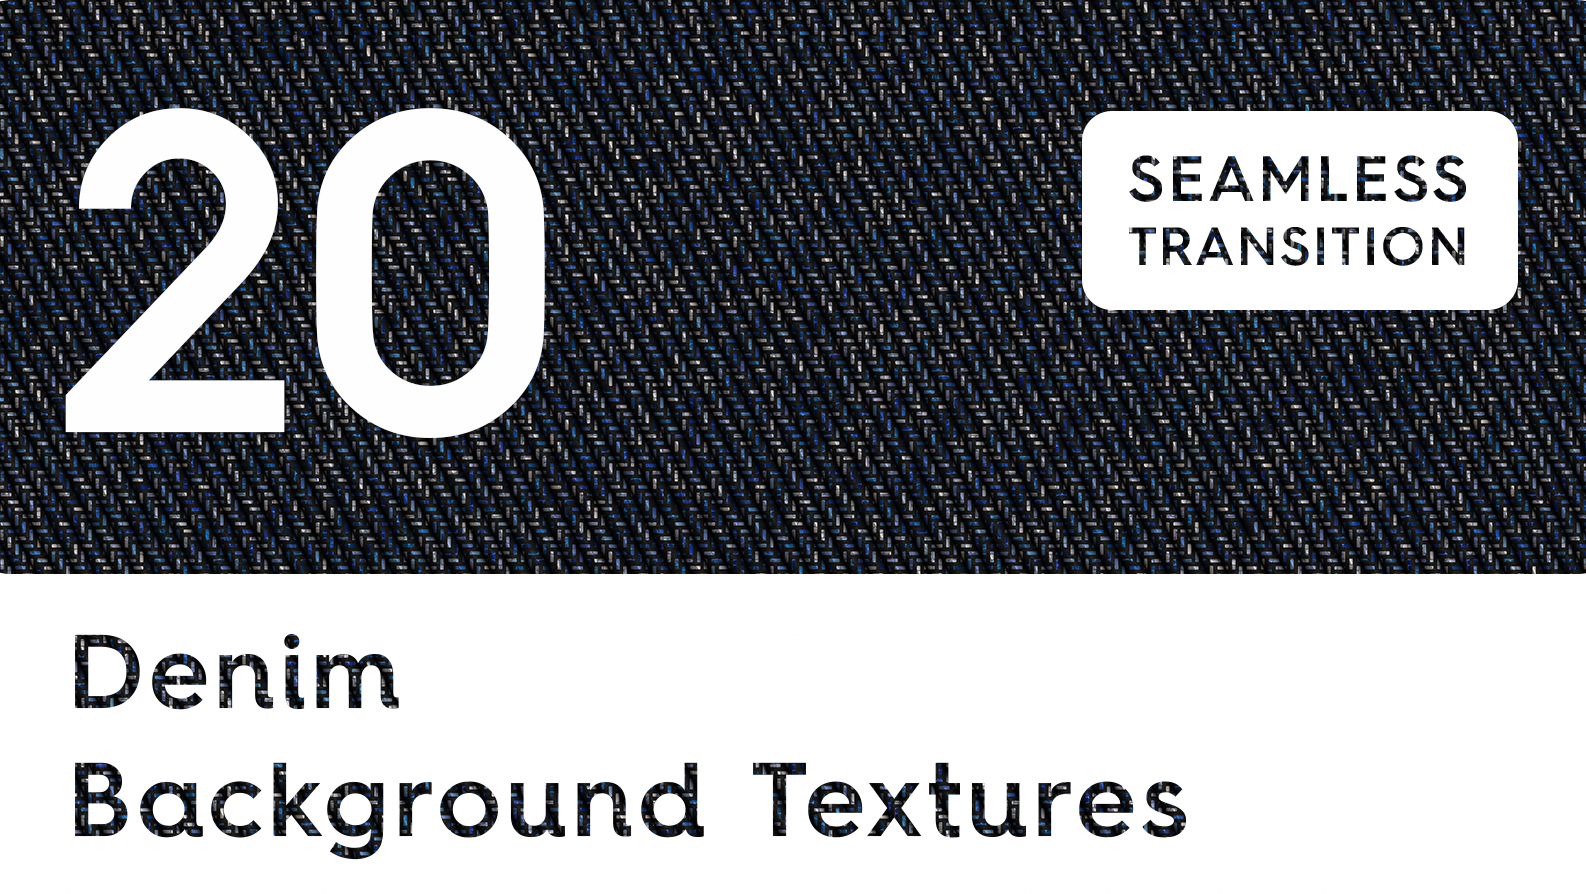 242,990 Abstract Denim Texture Images, Stock Photos, 3D objects, & Vectors  | Shutterstock